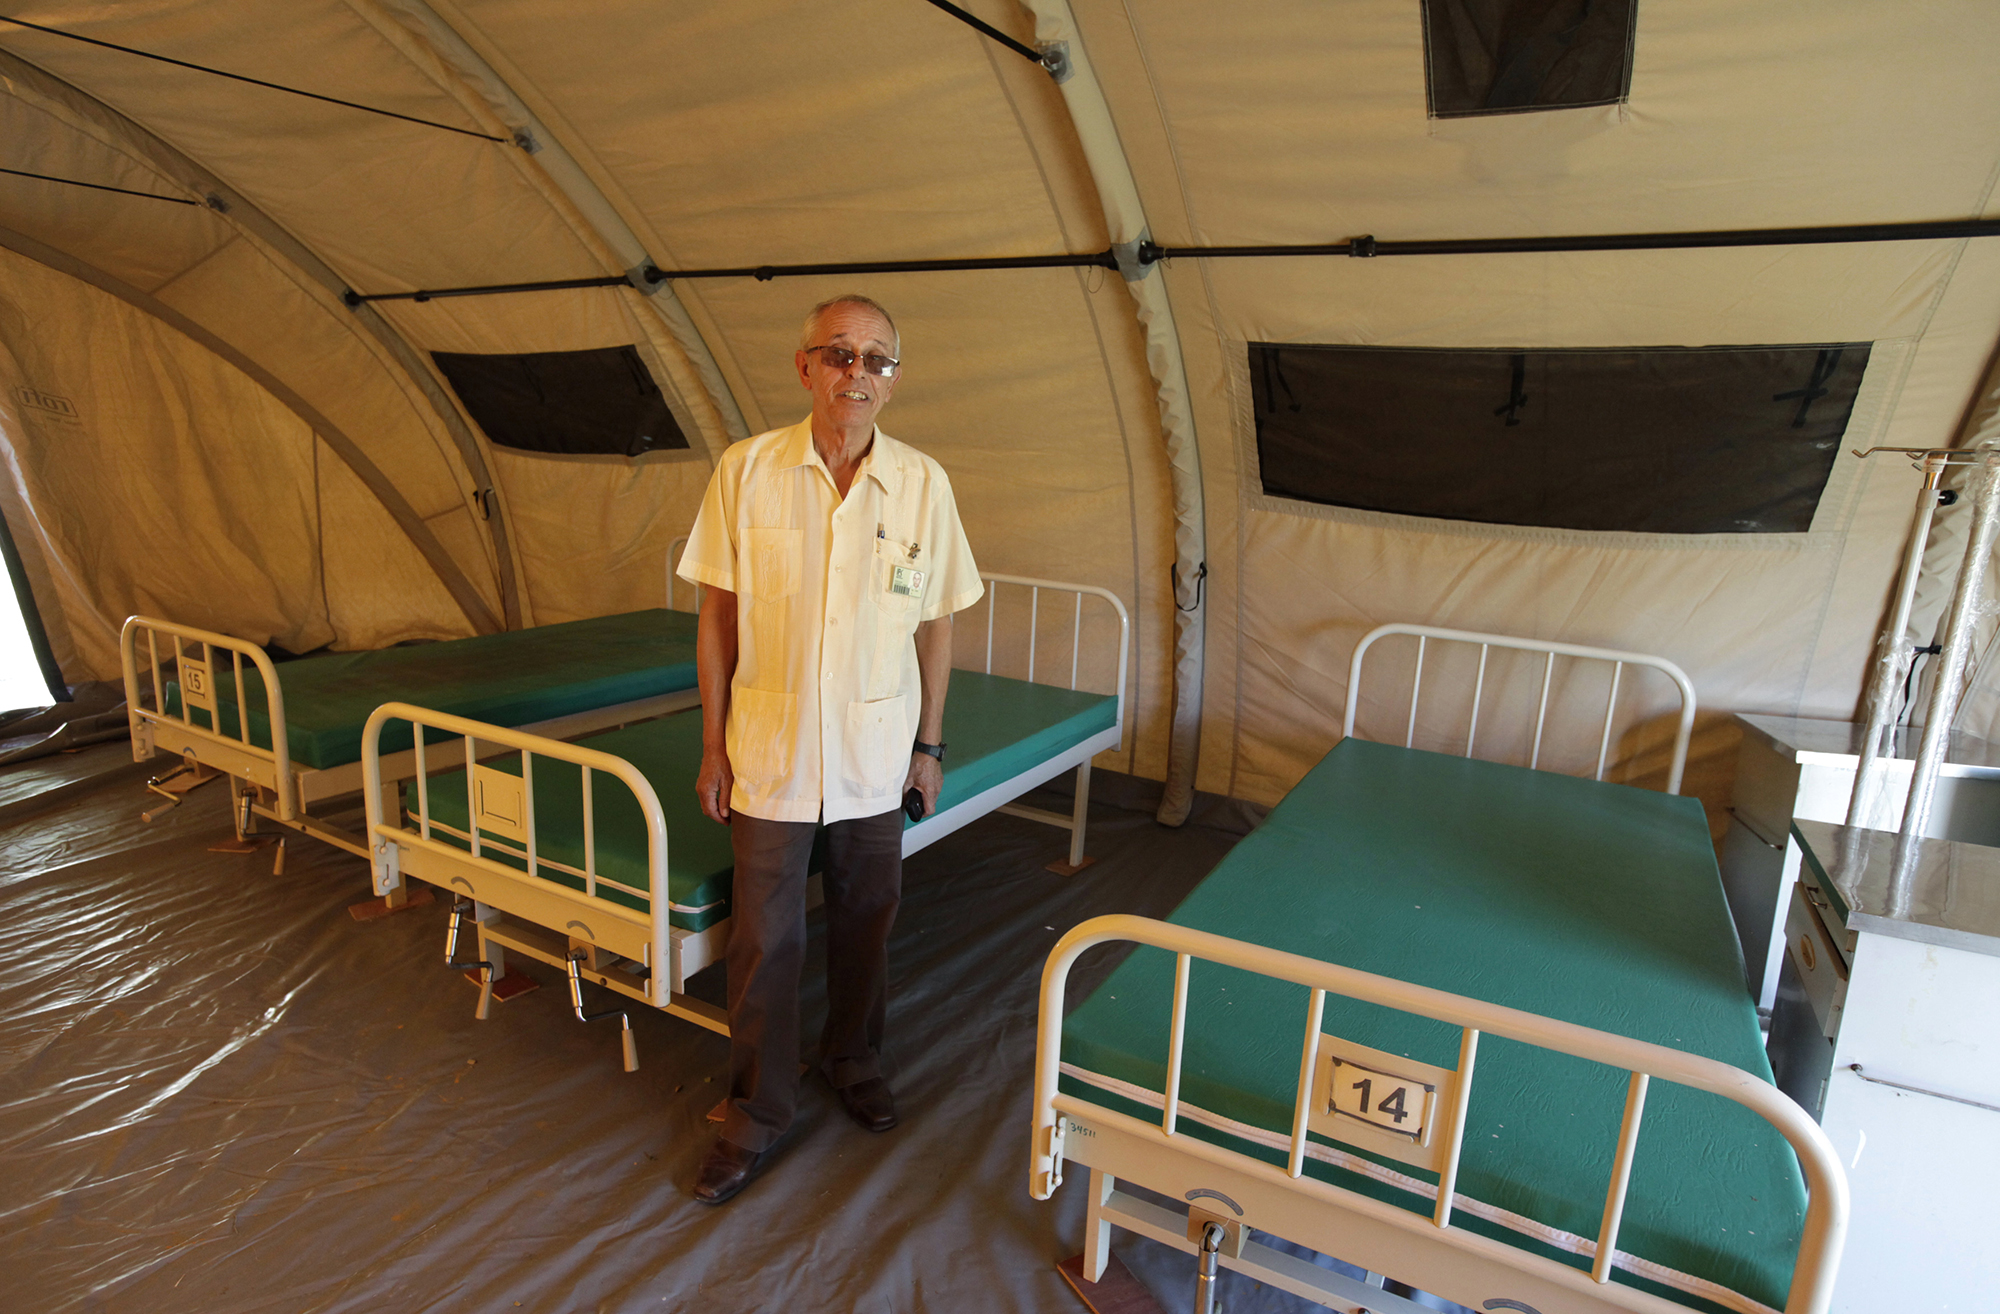 Jorge Perez, director of the Pedro Kouri Tropical Medicine Institute, where Cuban doctors train for their Ebola mission, poses for a picture in a tent set up for training purposes in Havana October 17, 2014. Cuban doctors and U.S. military personnel could work side-by-side in West Africa as part of international efforts to contain the Ebola outbreak, possibly leading to improved bilateral relations, a top Cuban health official said on Friday. The two long-time adversaries are among the countries aiding West Africa, where Ebola has killed some 4,546 people since the outbreak of the hemorrhagic fever began there in March. The Cuban medical personnel undergo three weeks of training at the Pedro Kouri Tropical Medicine Institute on the outskirts of Havana, where health officials set up a field hospital of tents to simulate conditions in West Africa. REUTERS/Enrique De La Osa (CUBA - Tags: HEALTH SOCIETY) - RTR4AMO7